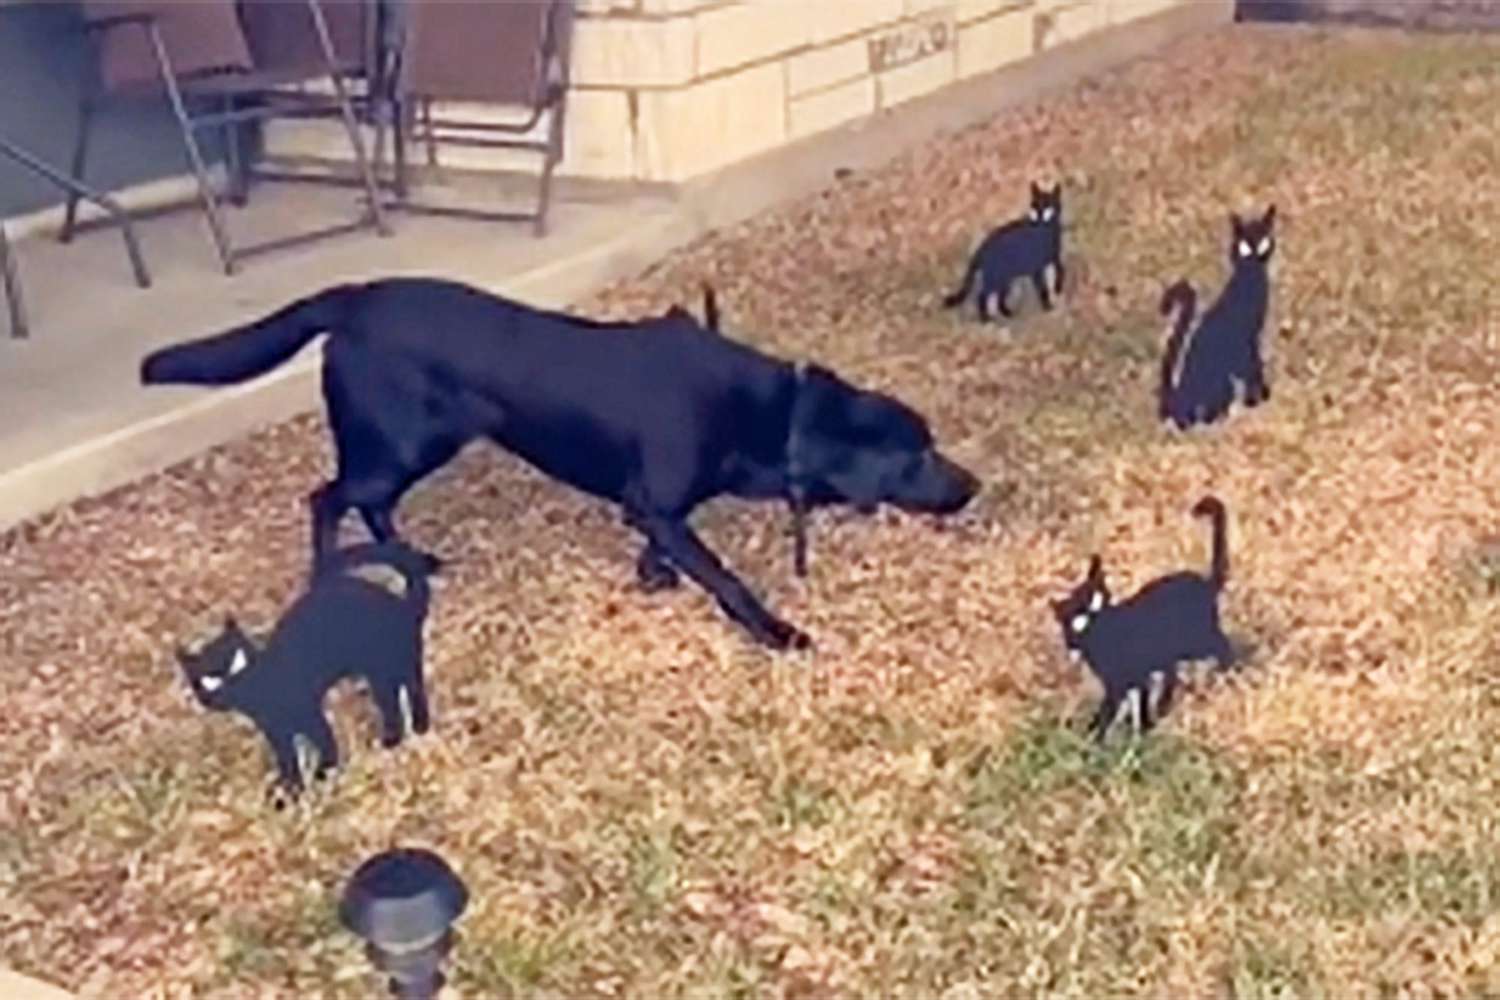 black lab freezes after seeing black cat Halloween decorations